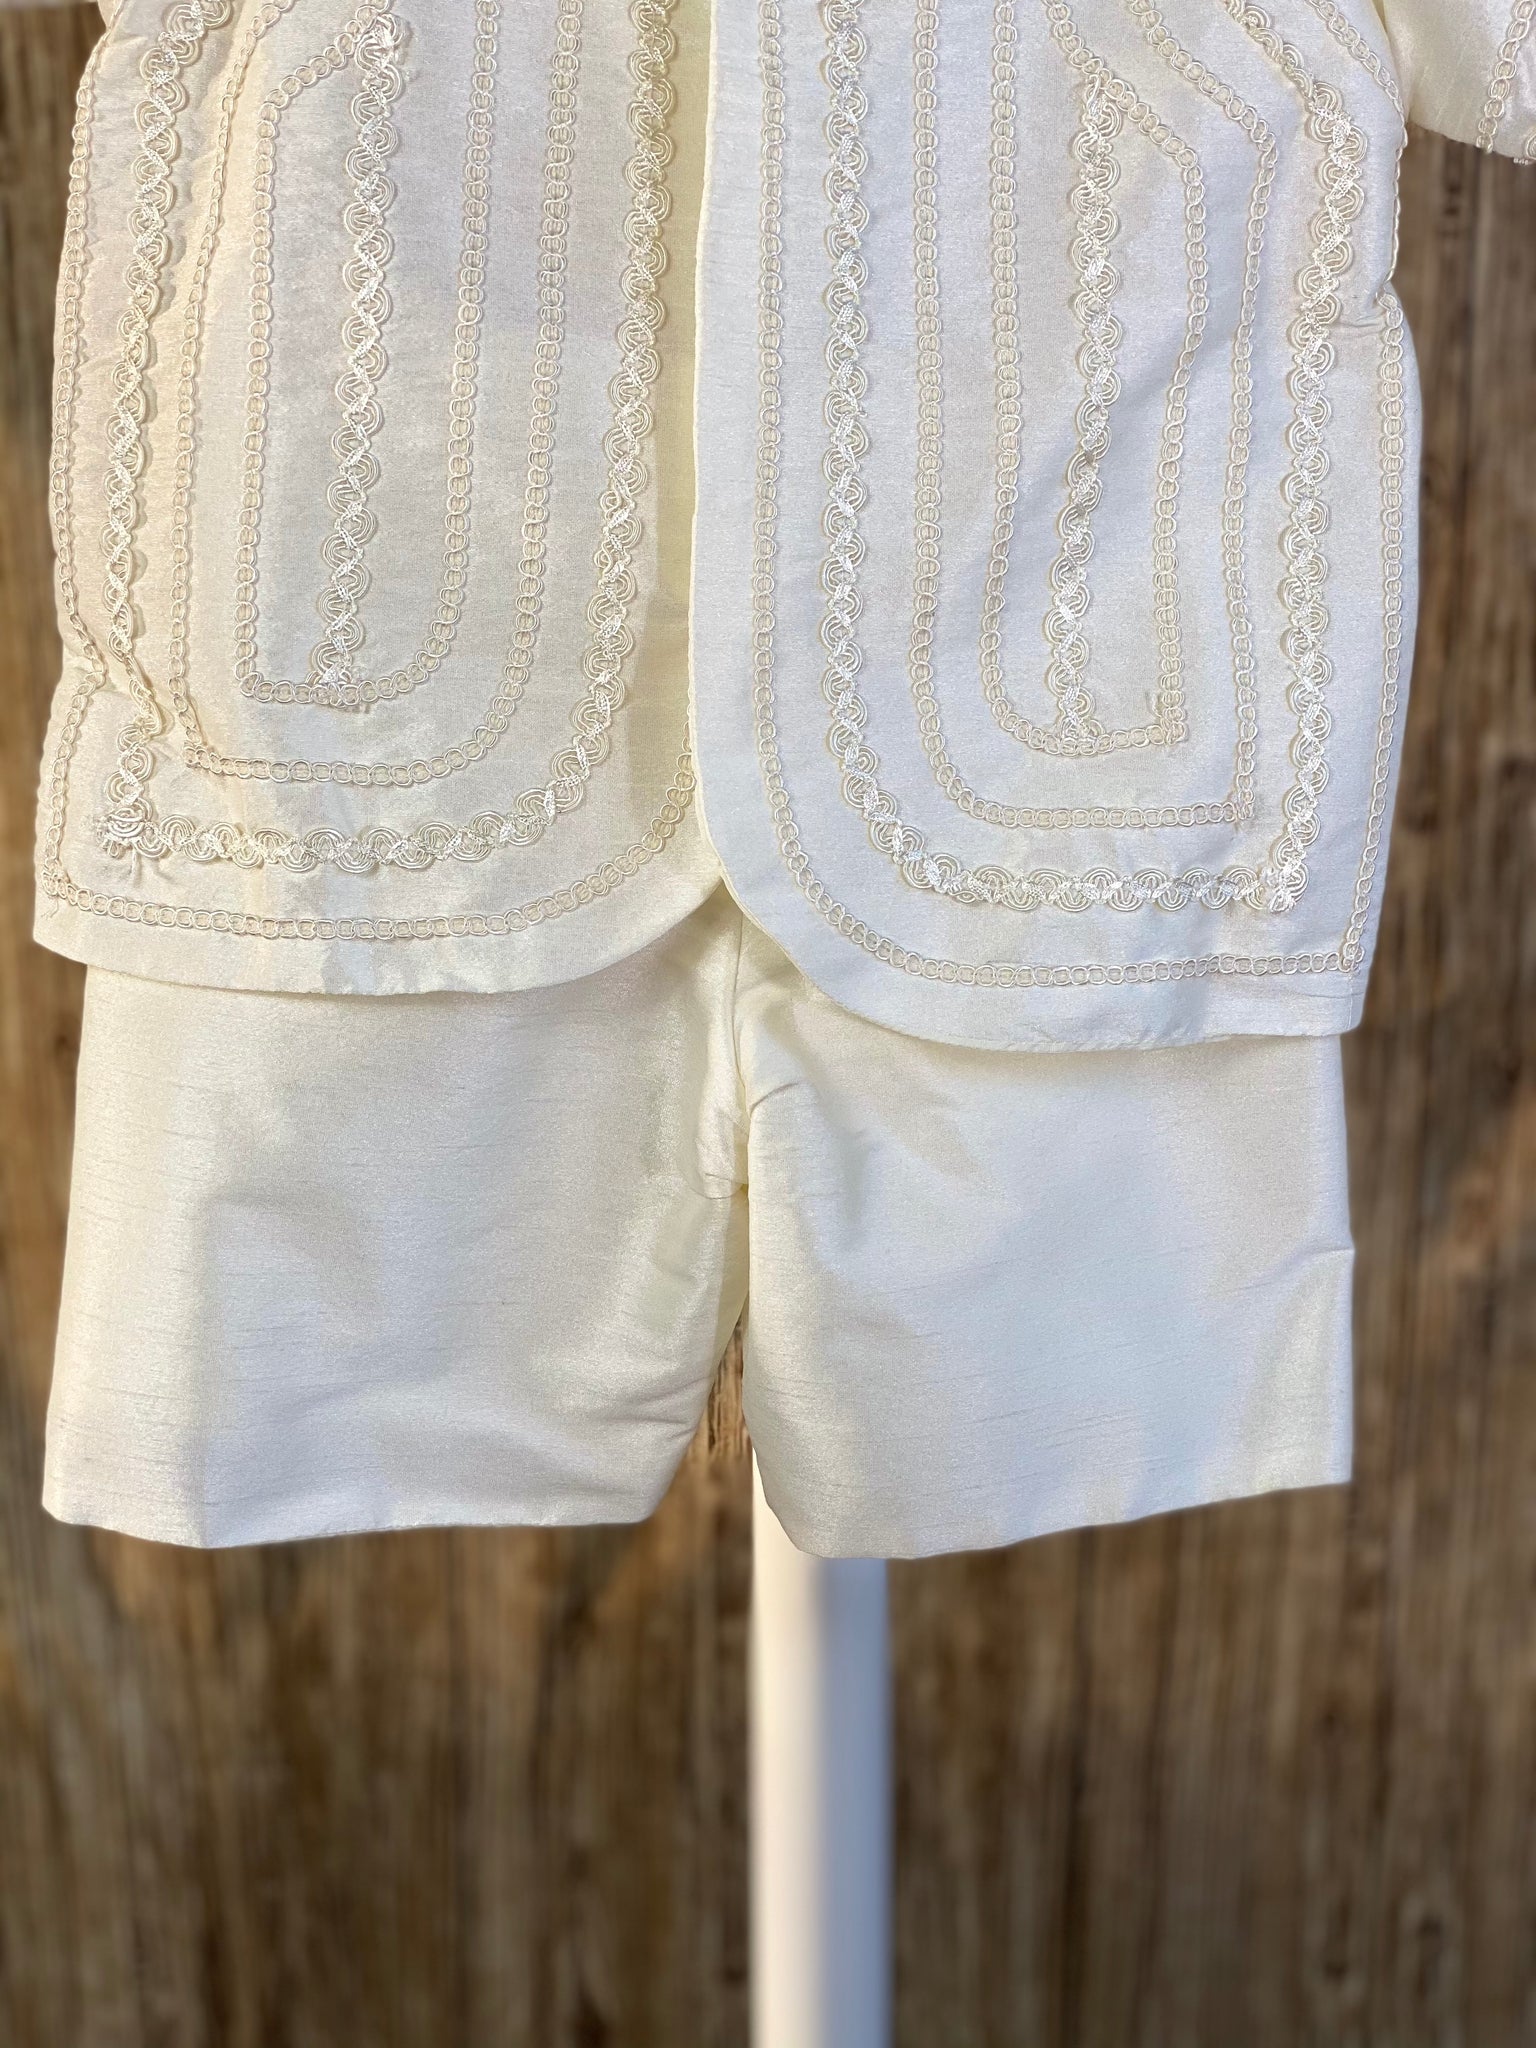 This a beautiful, one-of-a-kind boy’s baptism gown/set.  Lovely clothes for a precious child.  Ivory, size 24M 2- piece set including shirt and suspender pants Collared shirt with short sleeves Simple satin pants Twisted layered trim along shirt cuffs Twisted layered trim on shirt bodice Hidden button closure in front Elastic on the back of pants